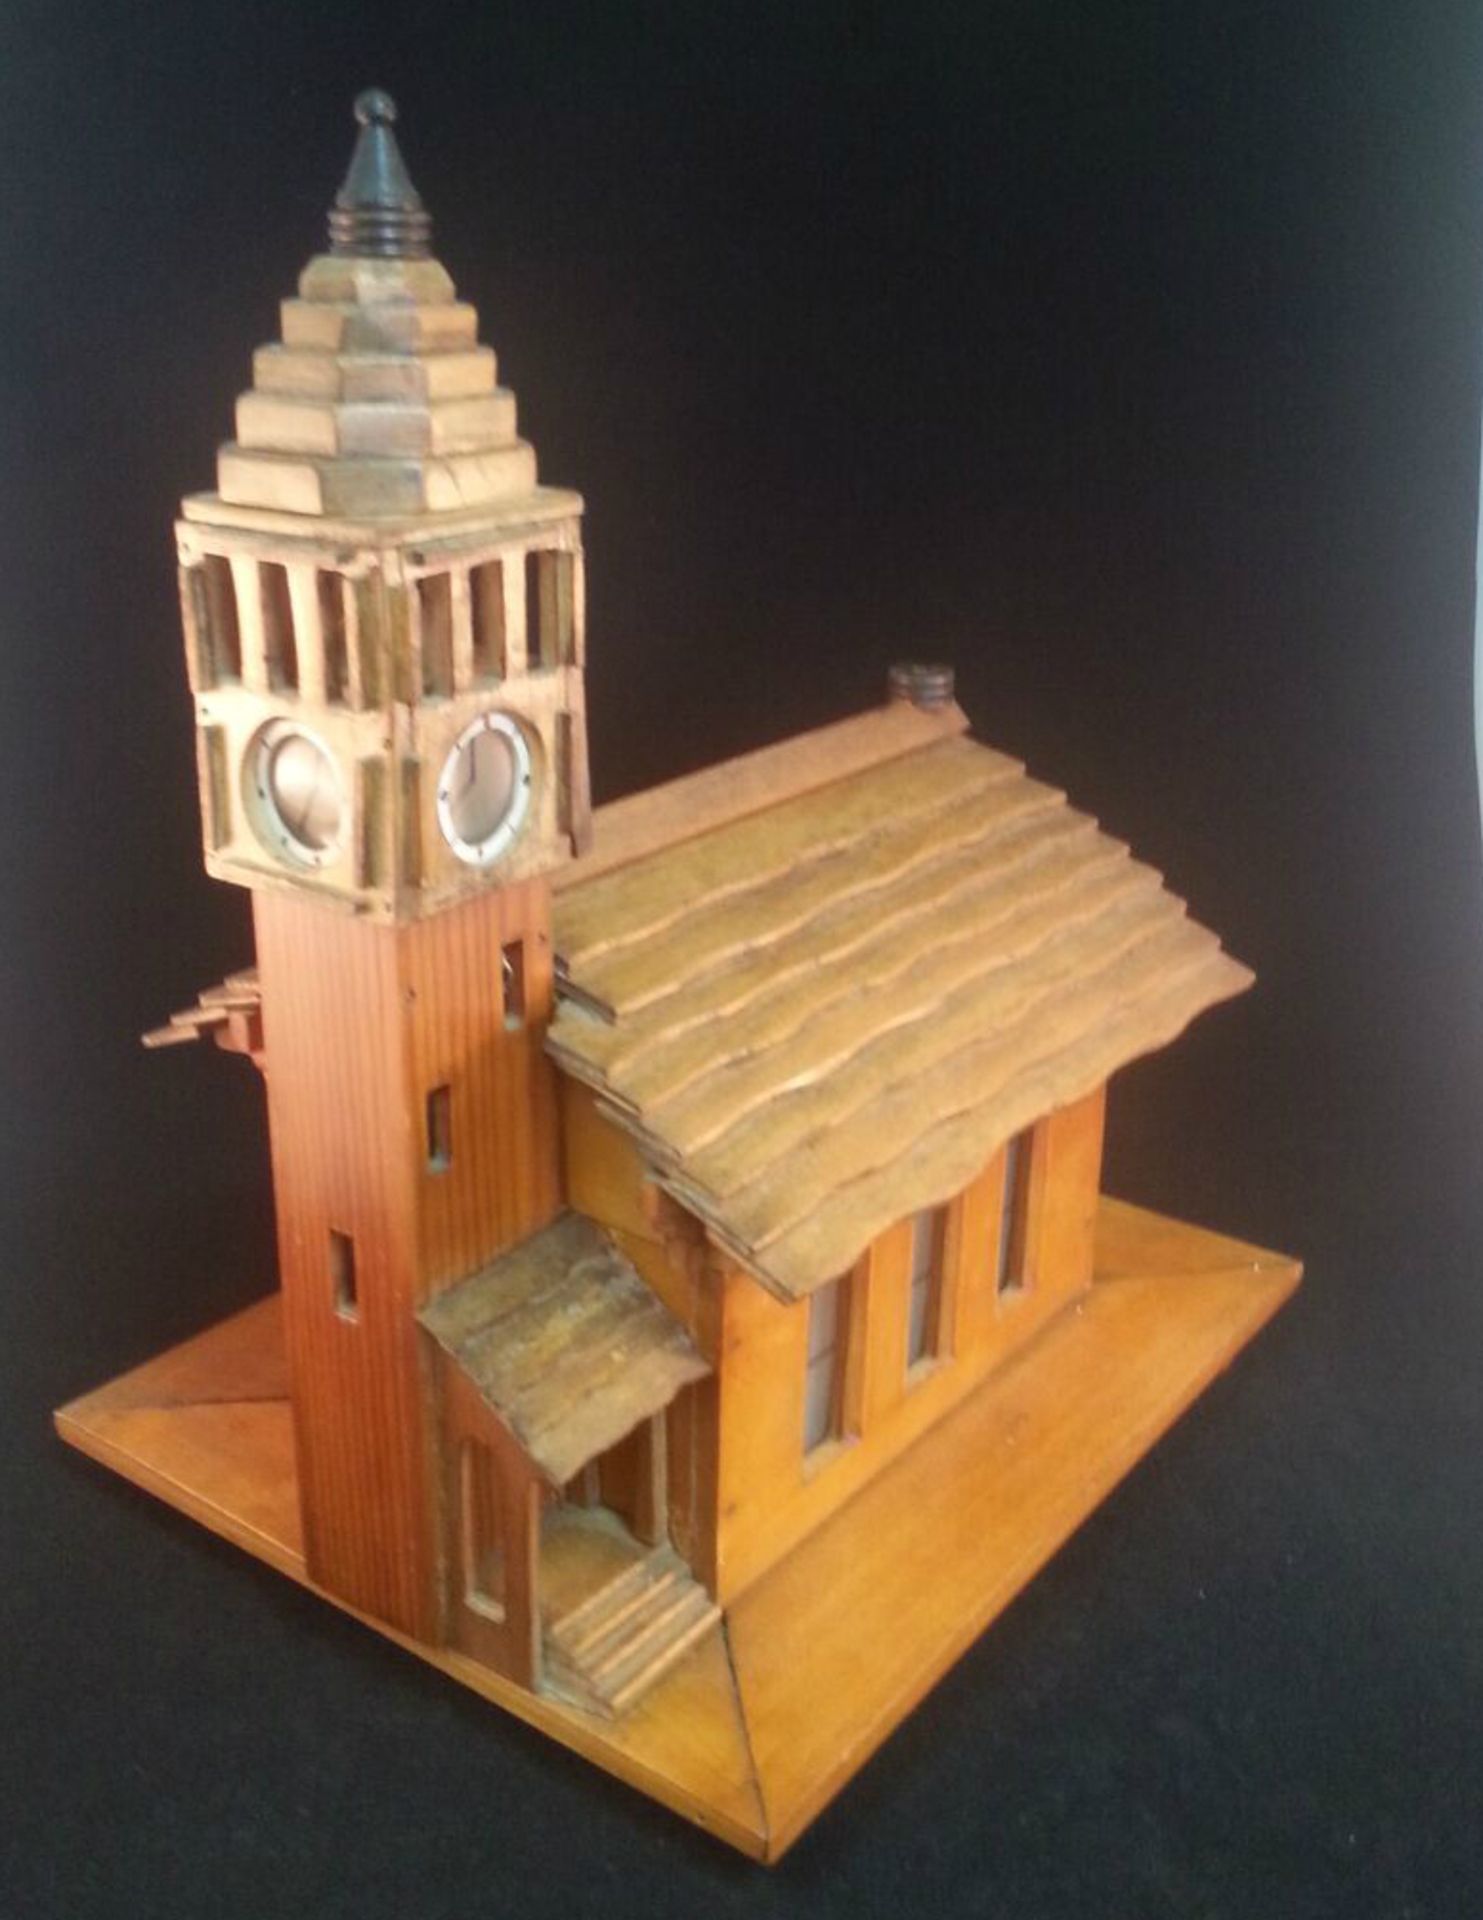 STUNNING HANDMADE WOODEN CHURCH OR CHAPEL FITTED WITH A WORKING REUGE STE CROIX 18 NOTE MUSIC BOX.